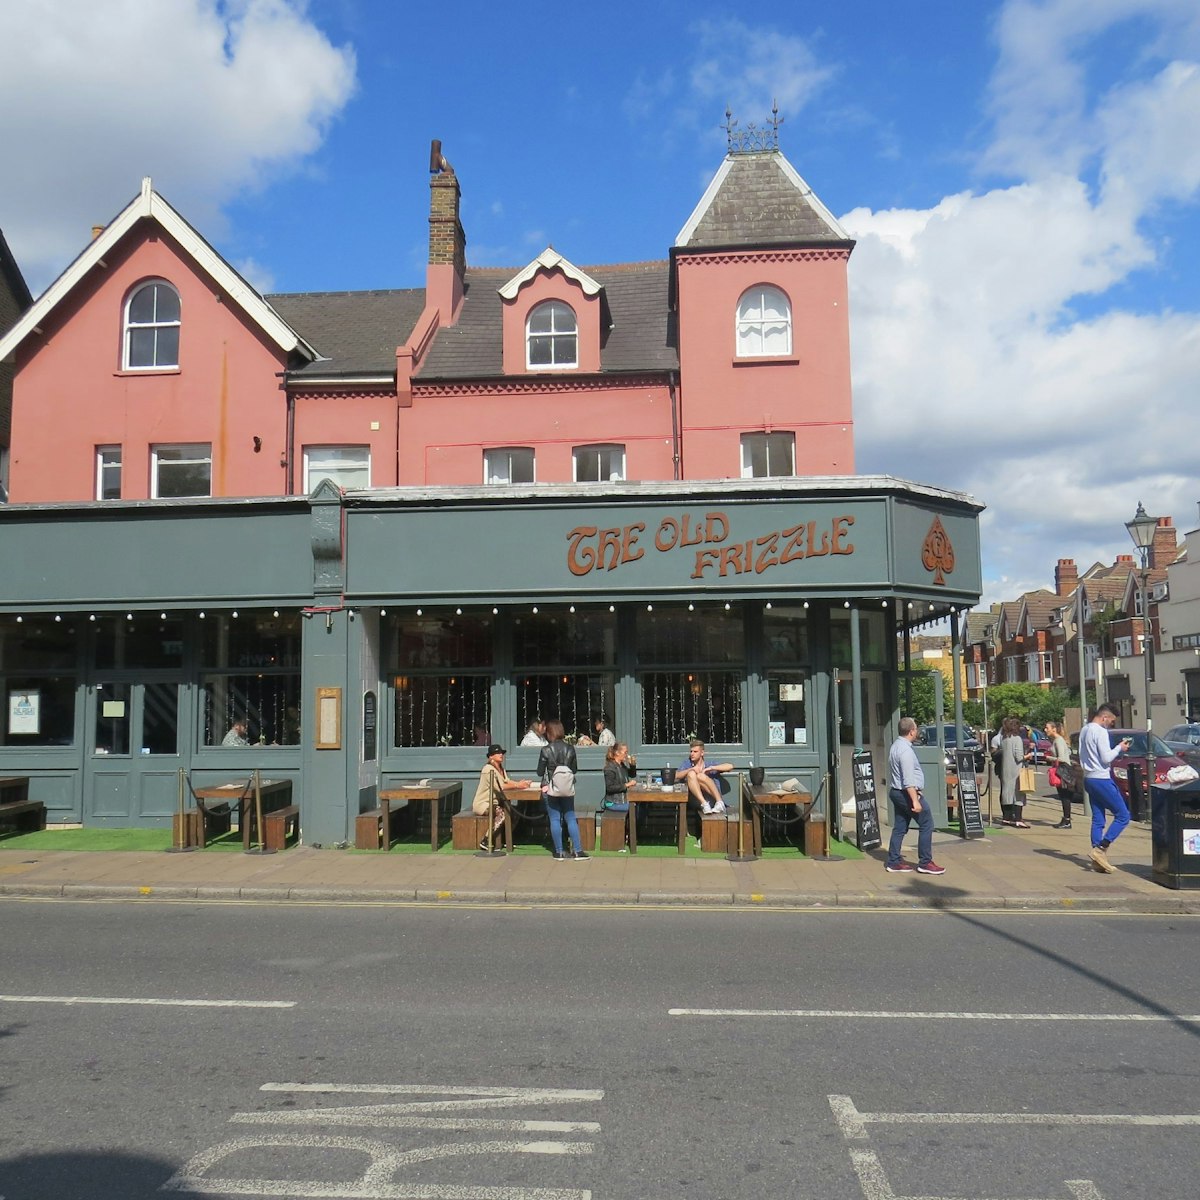 The exterior of The Old Frizzle in Wimbledon